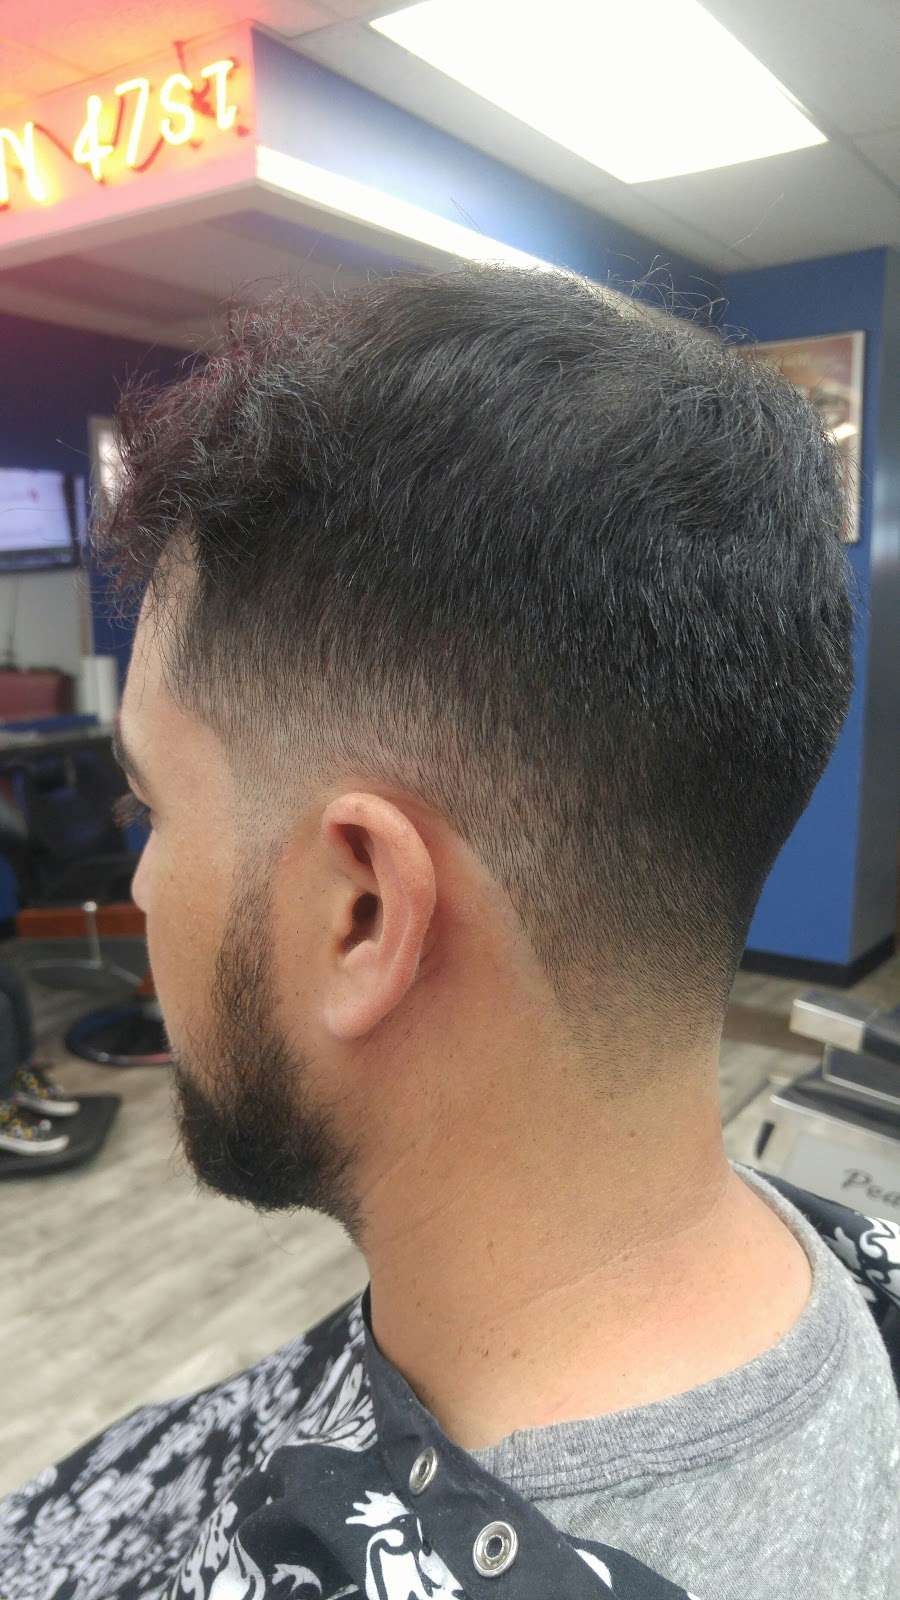 Clippers barber shop | 3907 W 47th St, Chicago, IL 60632, USA | Phone: (773) 669-2045